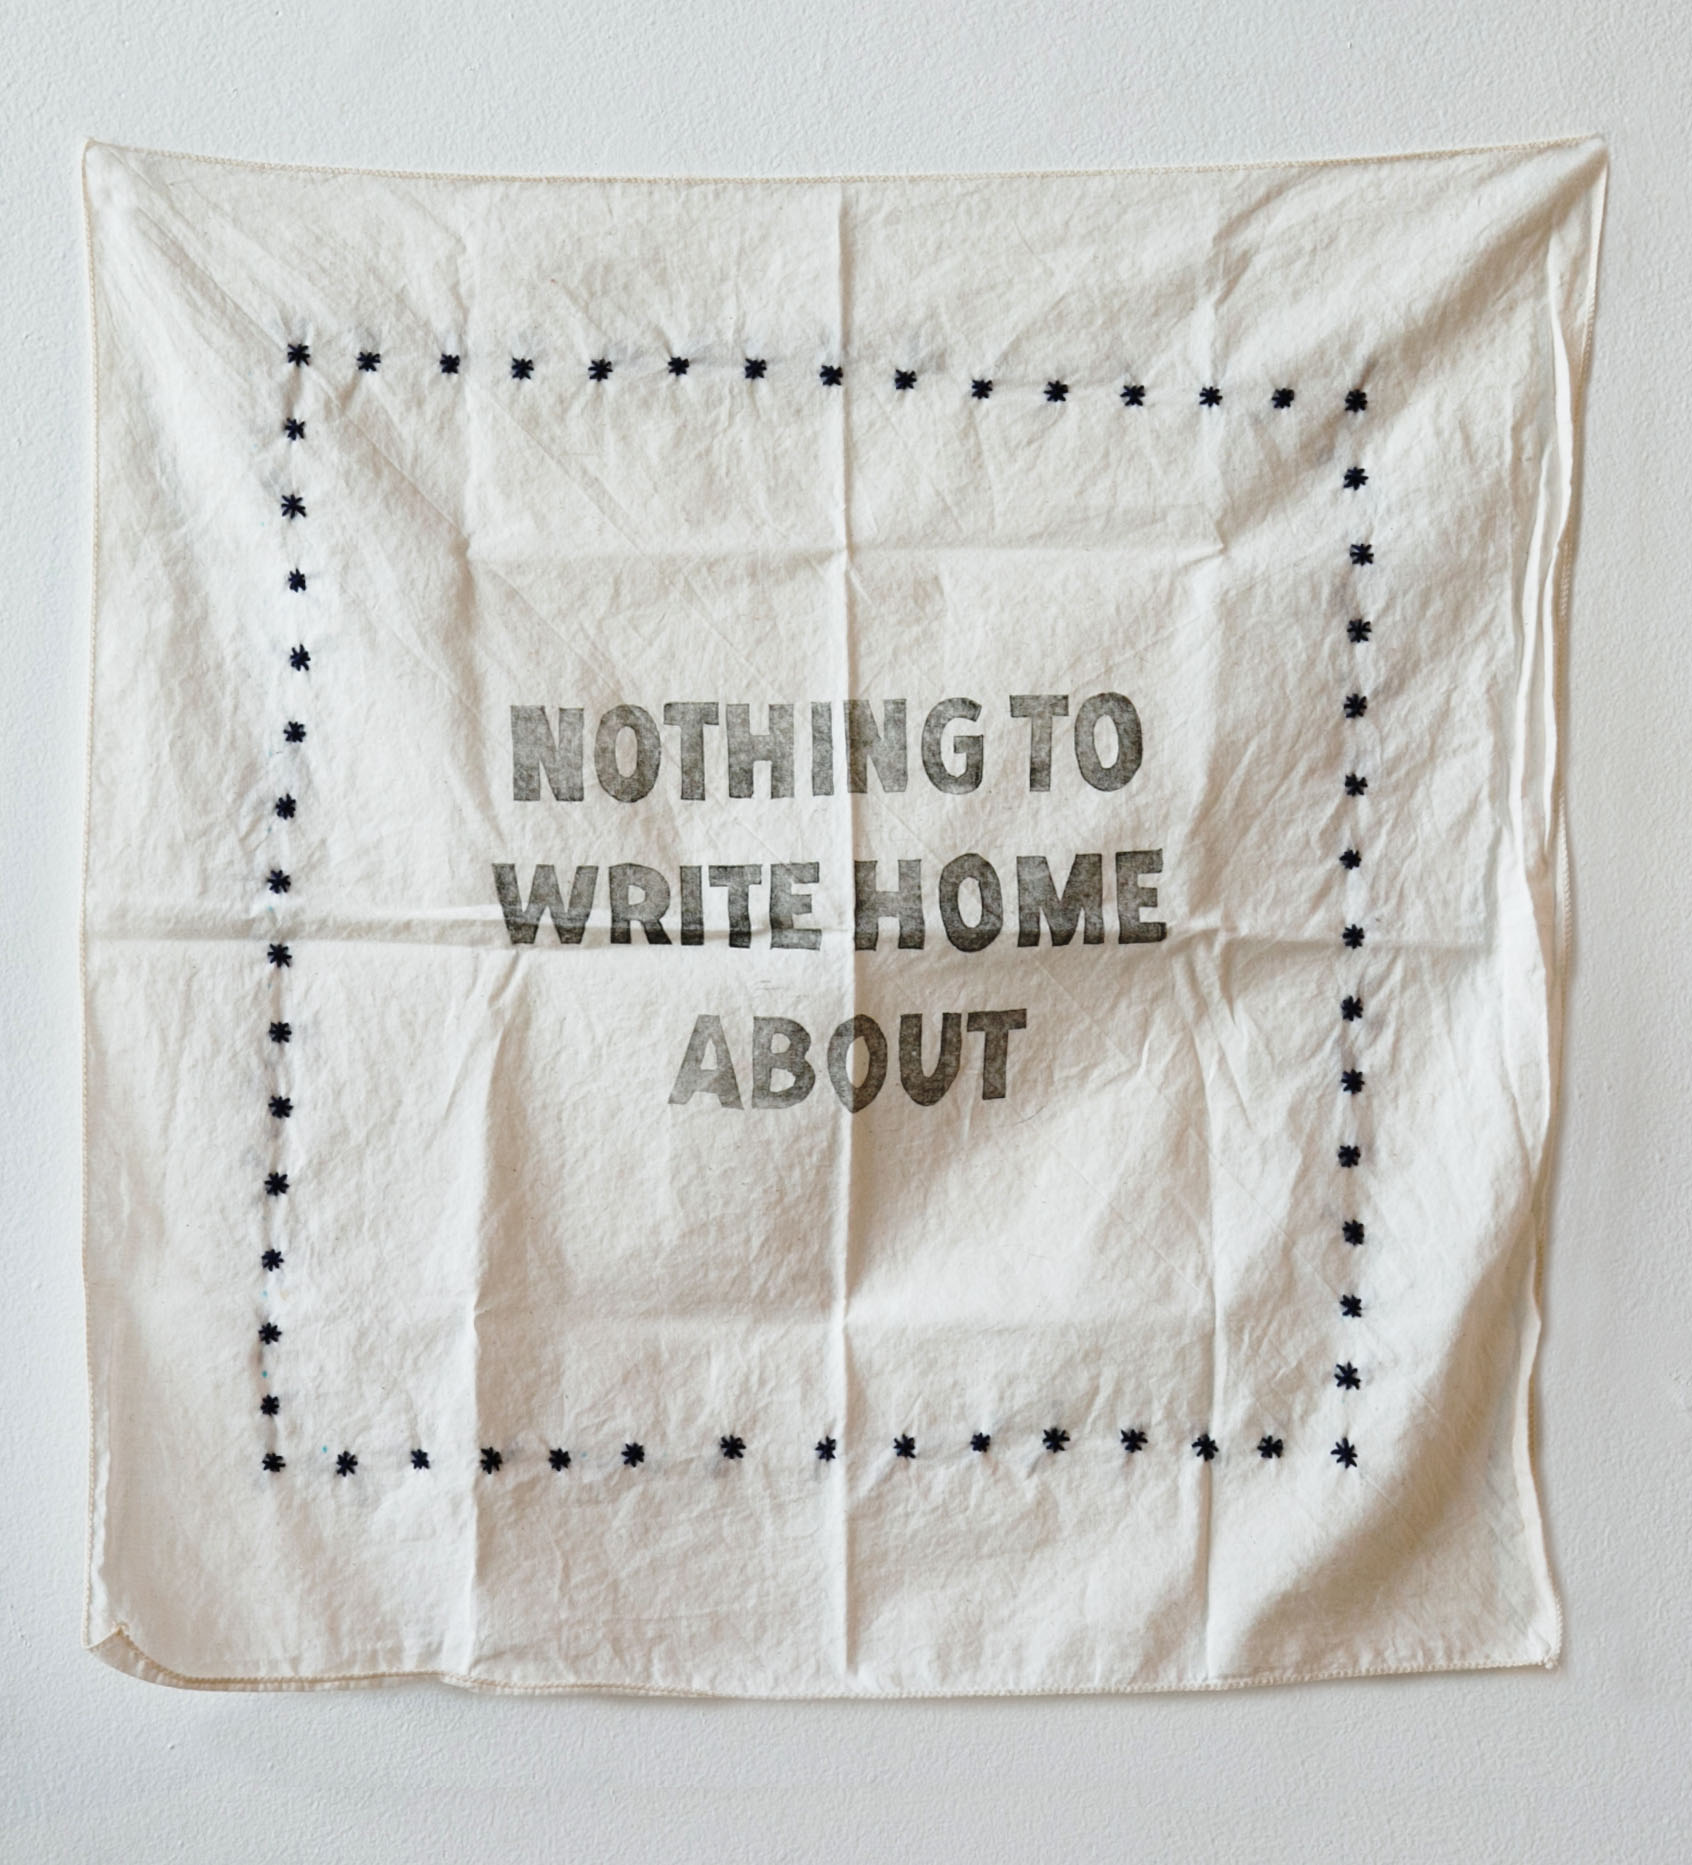   nothing   relief print and embroidery, 2020   20 x 20 in.  